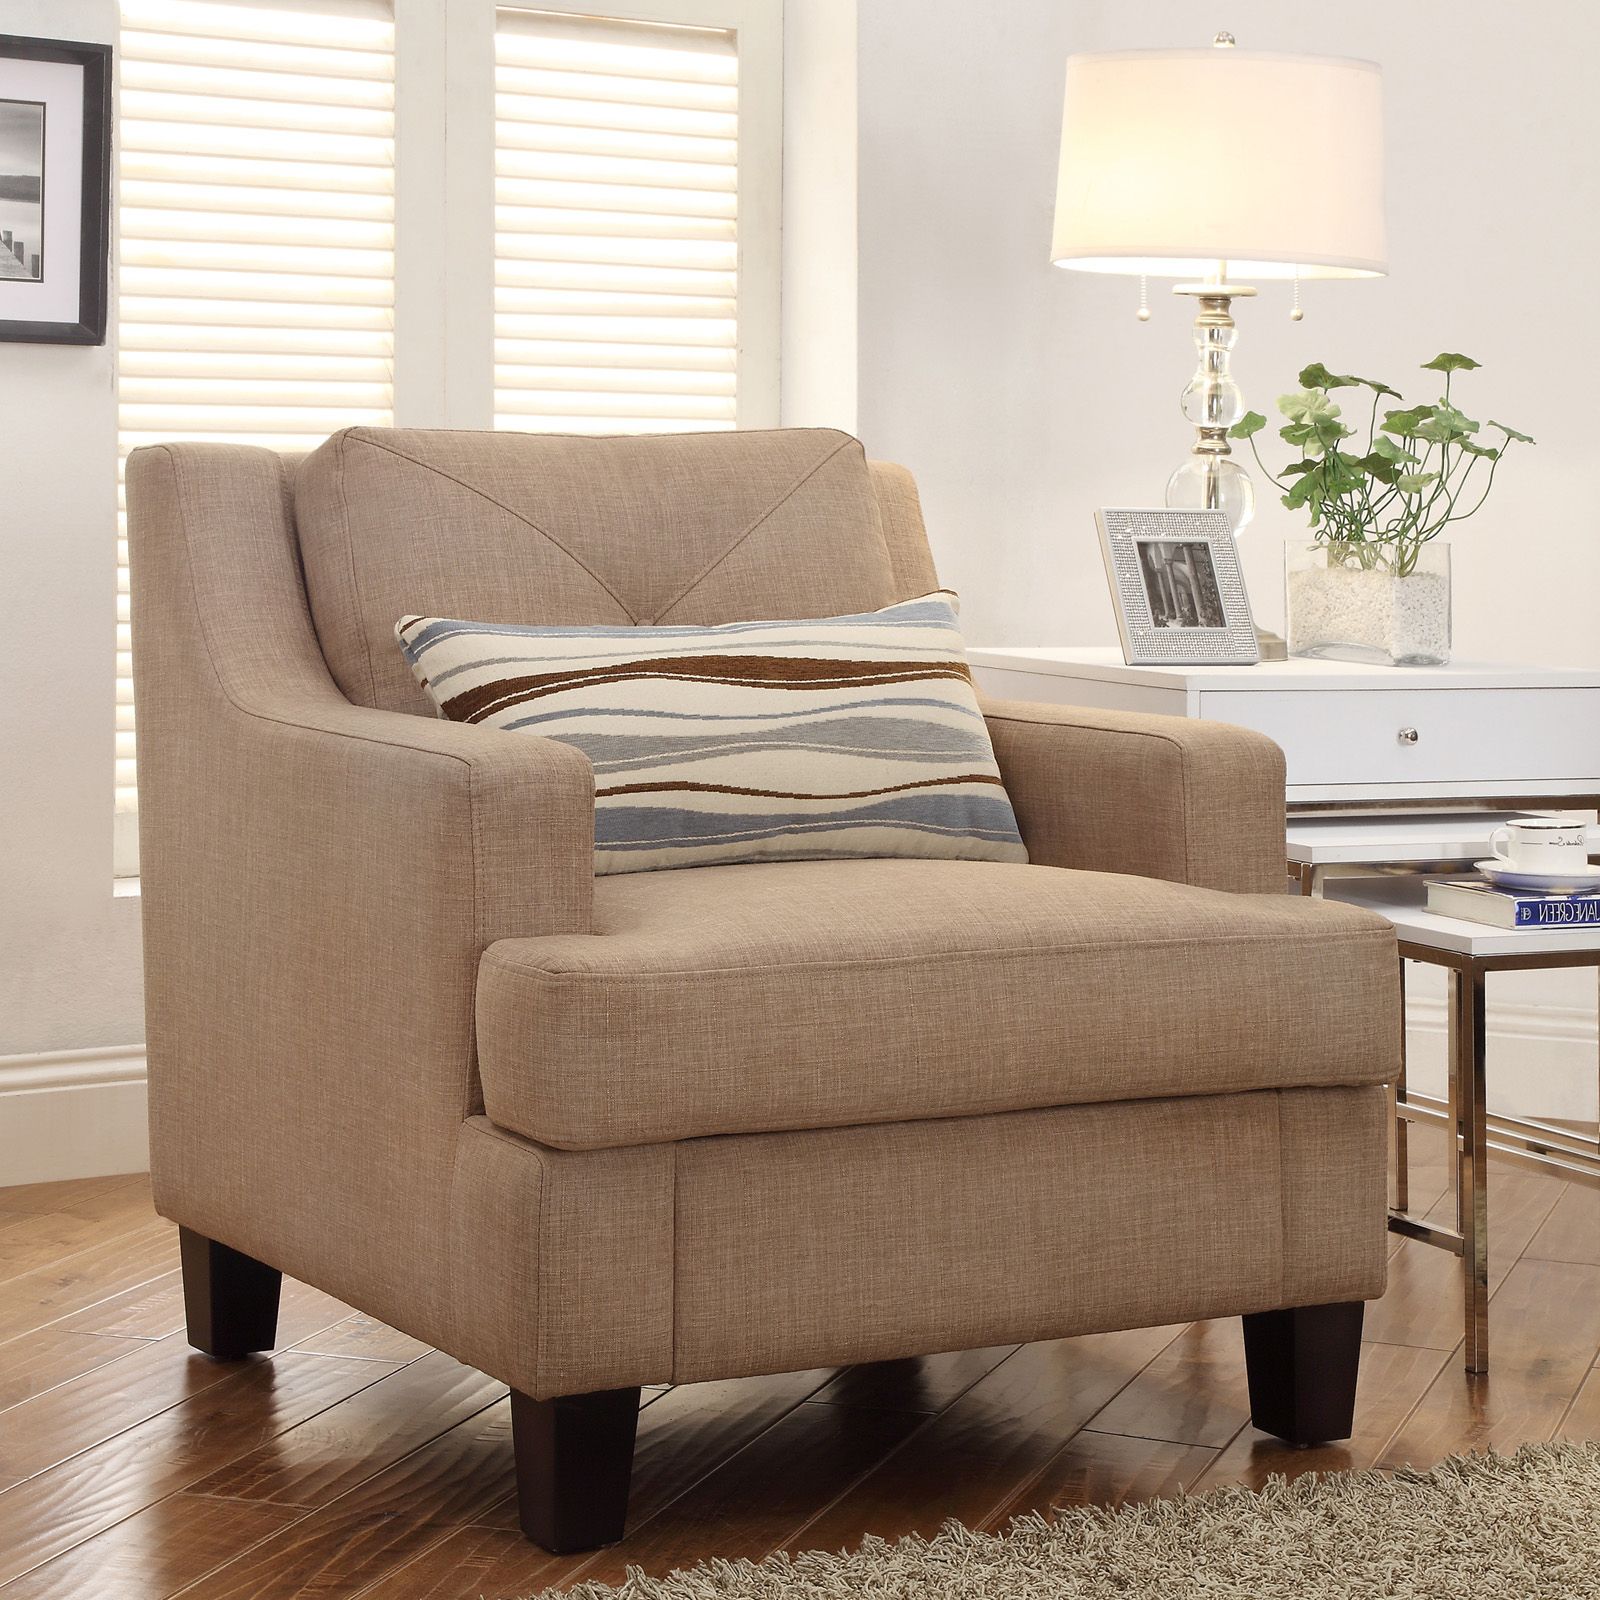 Inspire Q Upholstered Chair – Light Brown – Accent Chairs At Hayneedle Pertaining To Favorite Light Beige Round Accent Stools (View 7 of 10)